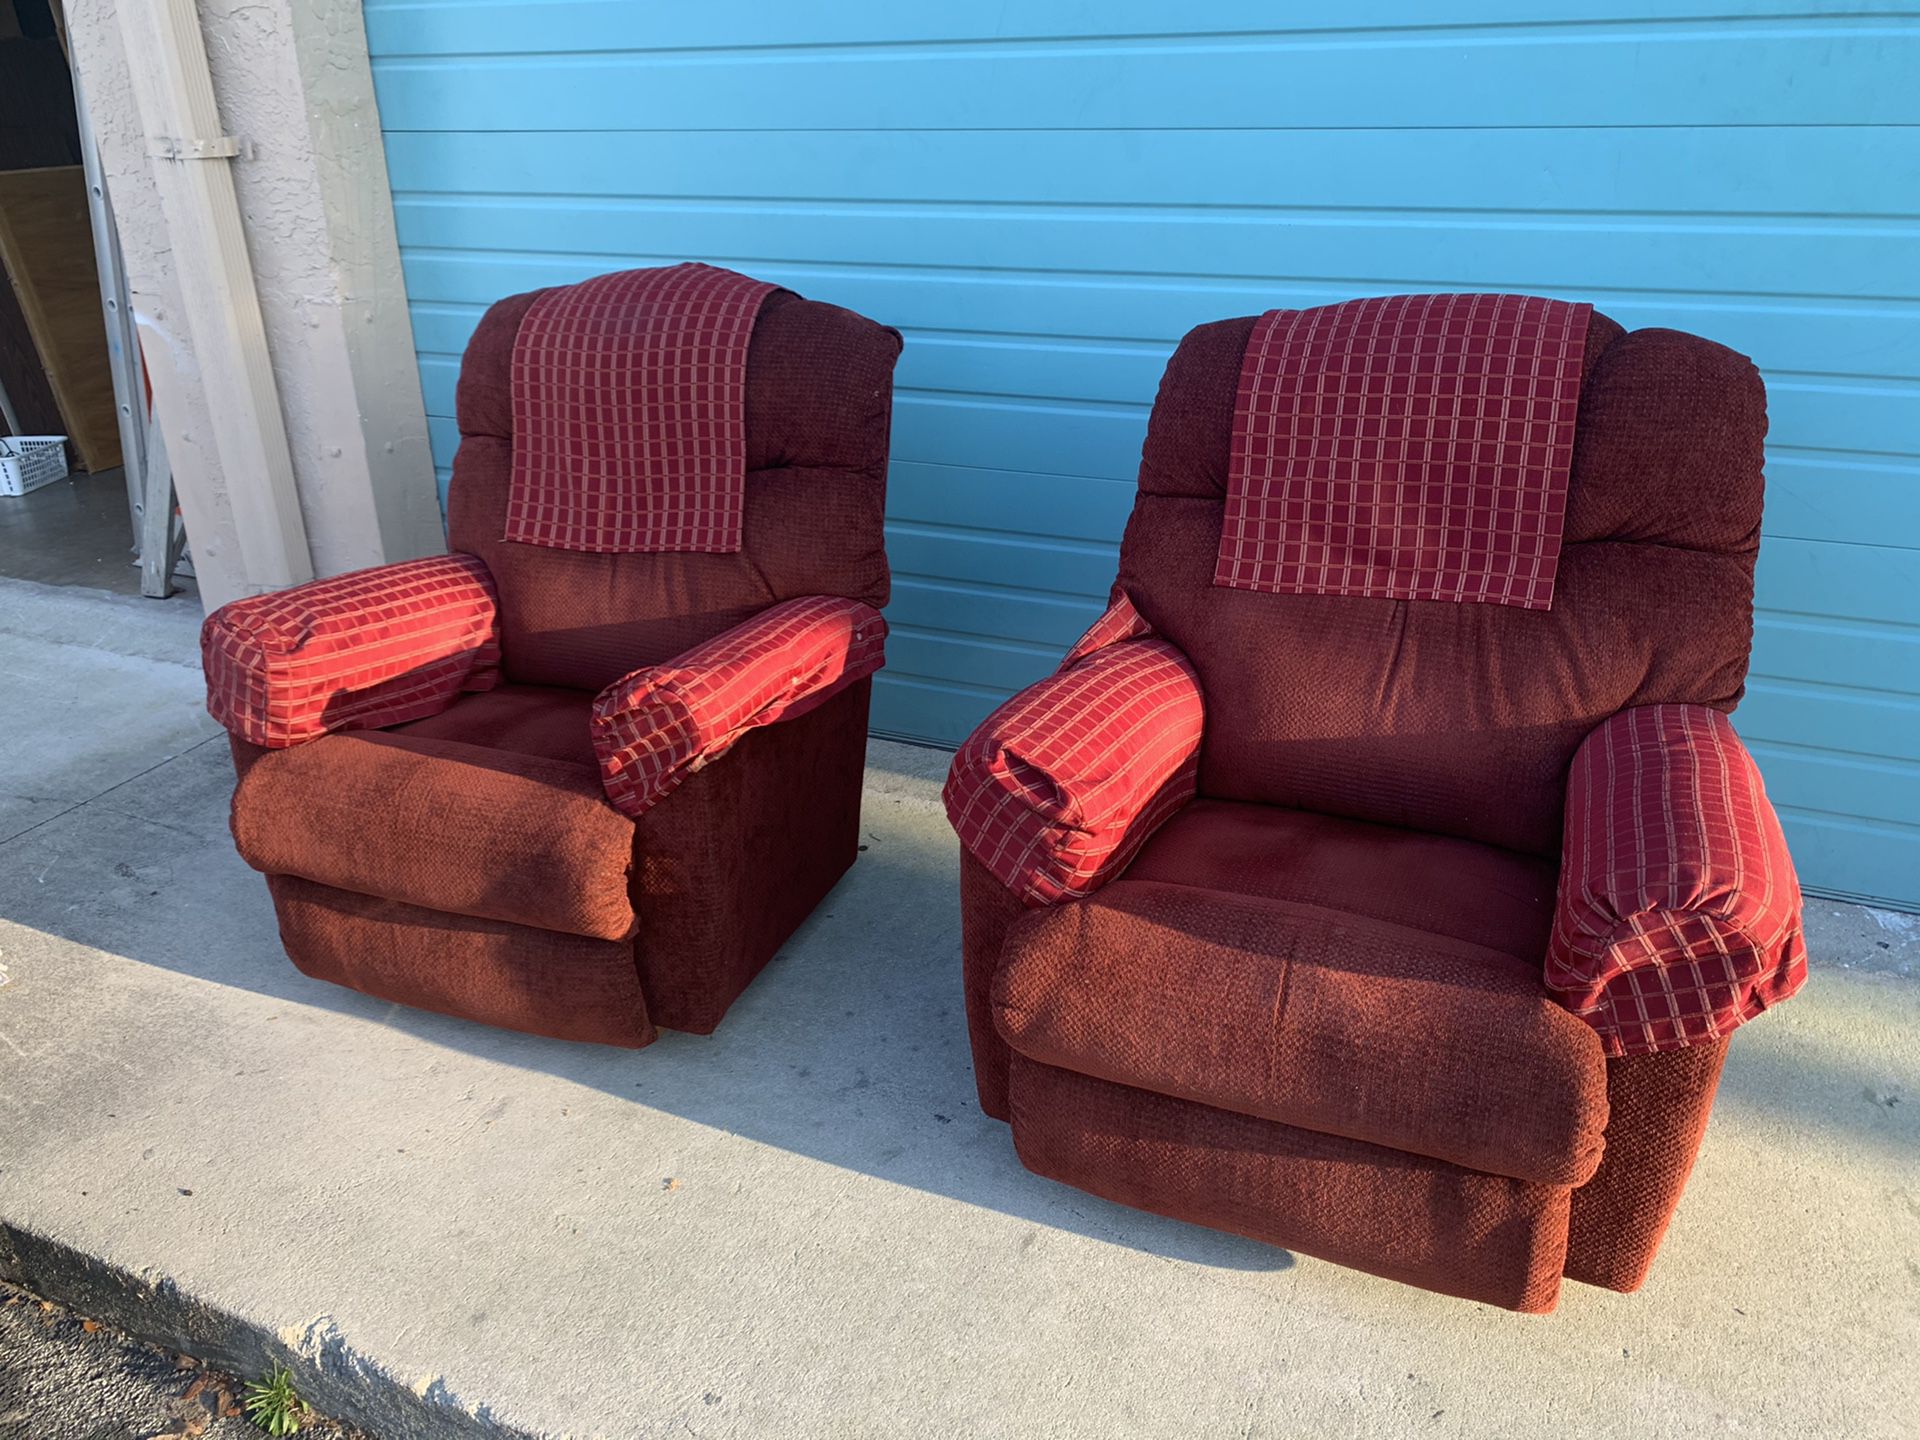 Pair of red lazy boy recliners